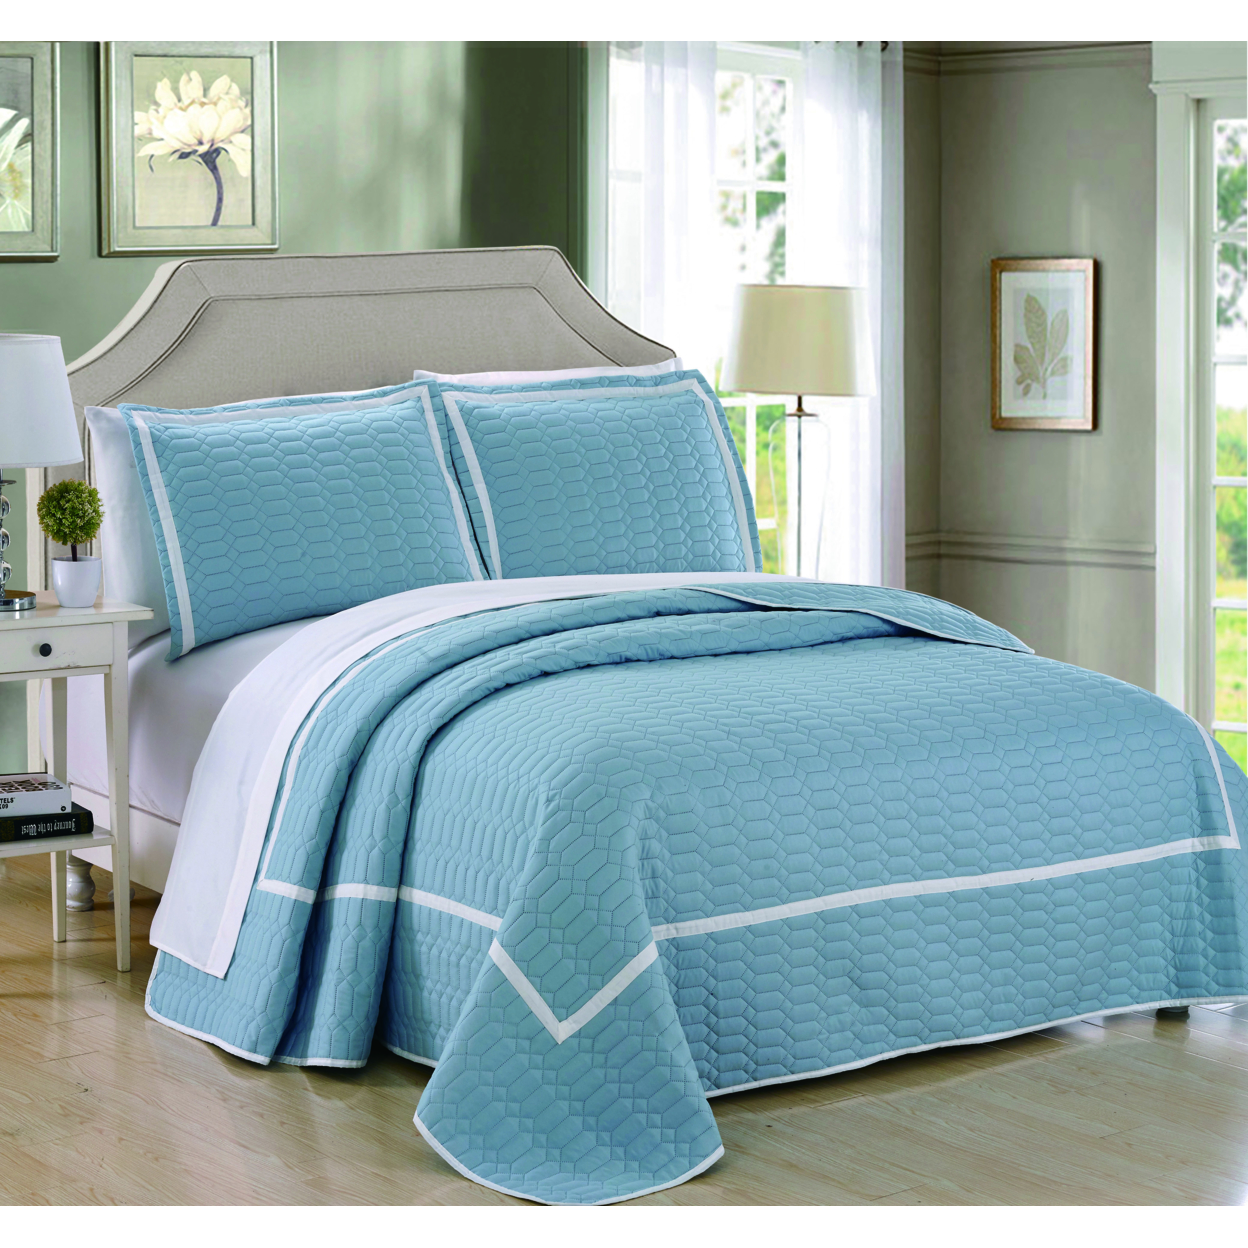 3 Or 2 Piece Halrowe Hotel Collection 2 Tone Banded Quilted Geometrical Embroidered Quilt Set - Blue, Twin